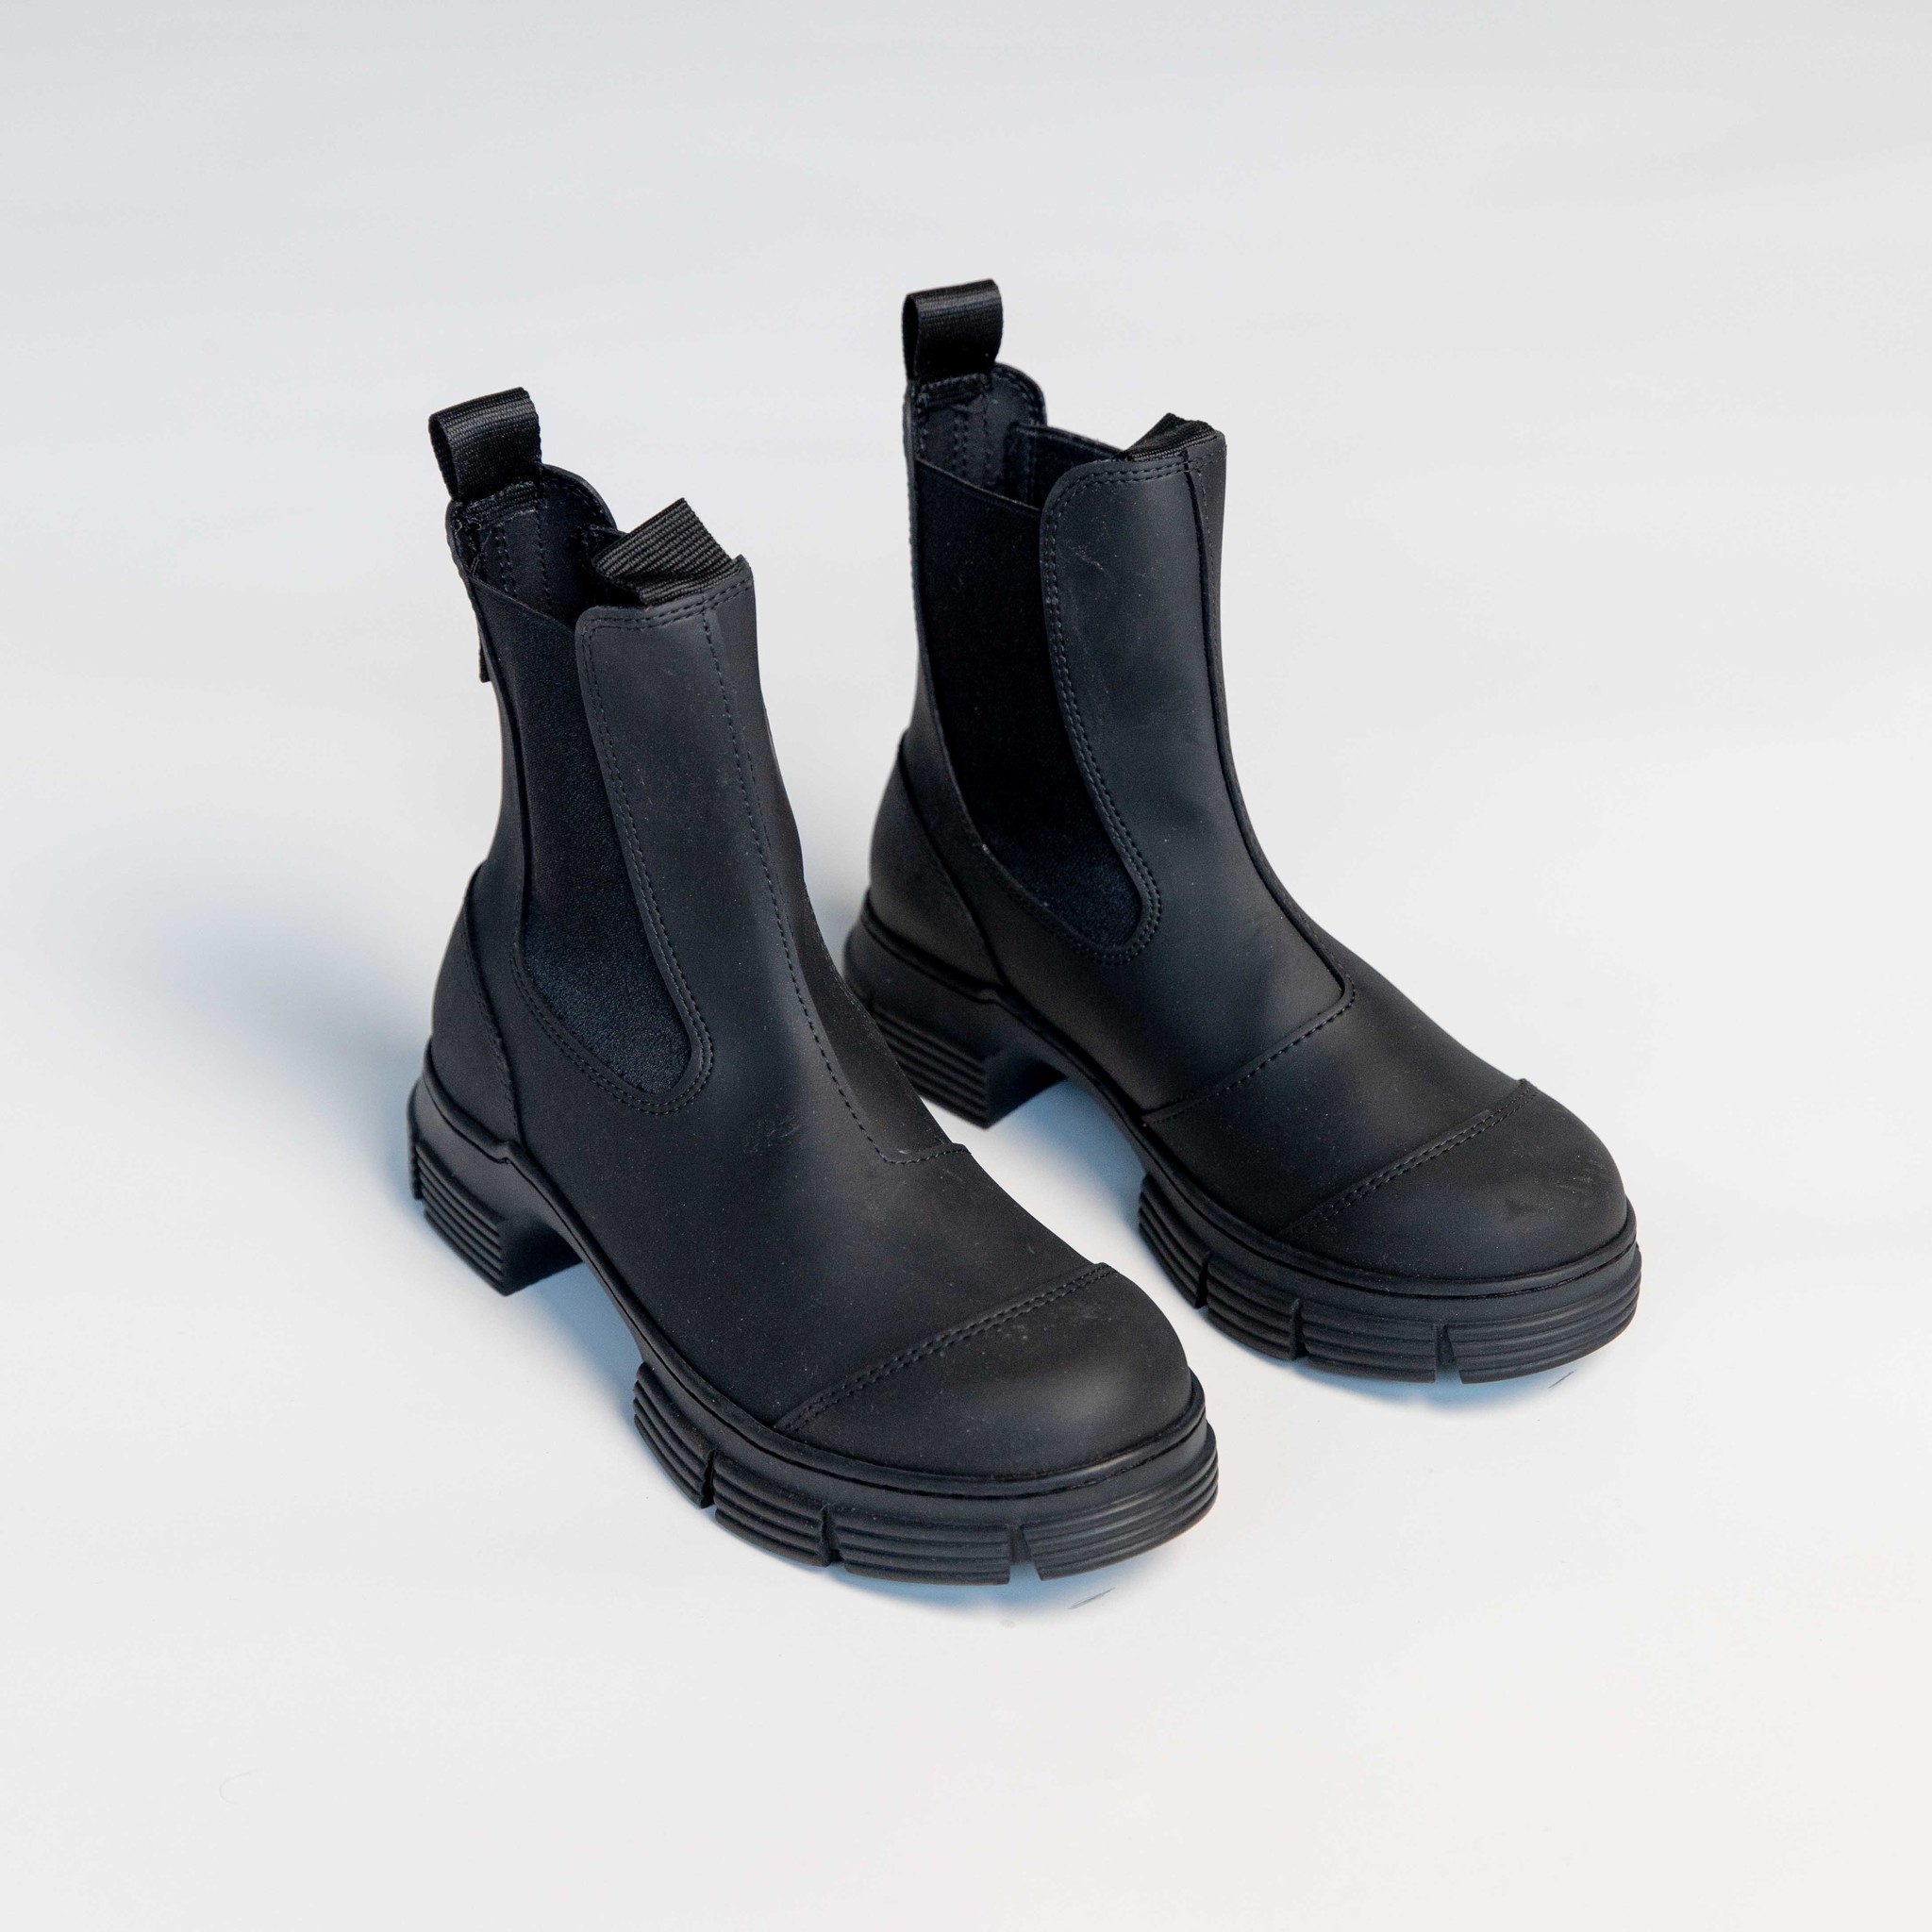 GANNI　Recycled Rubber City Boot検討させて頂きます